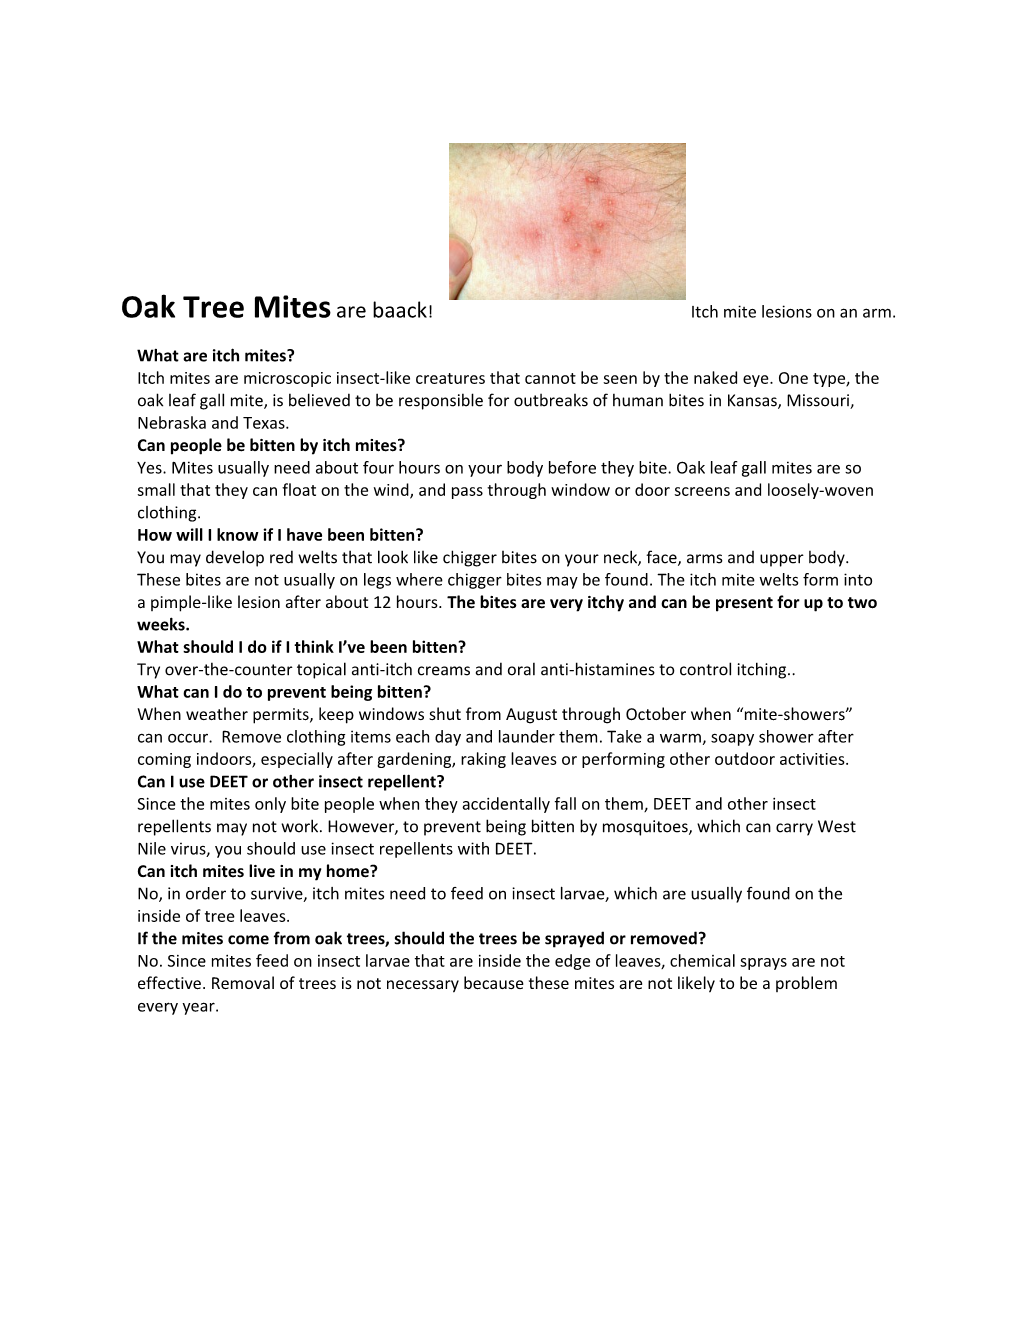 Oak Tree Mitesare Baack! Itch Mite Lesions on an Arm